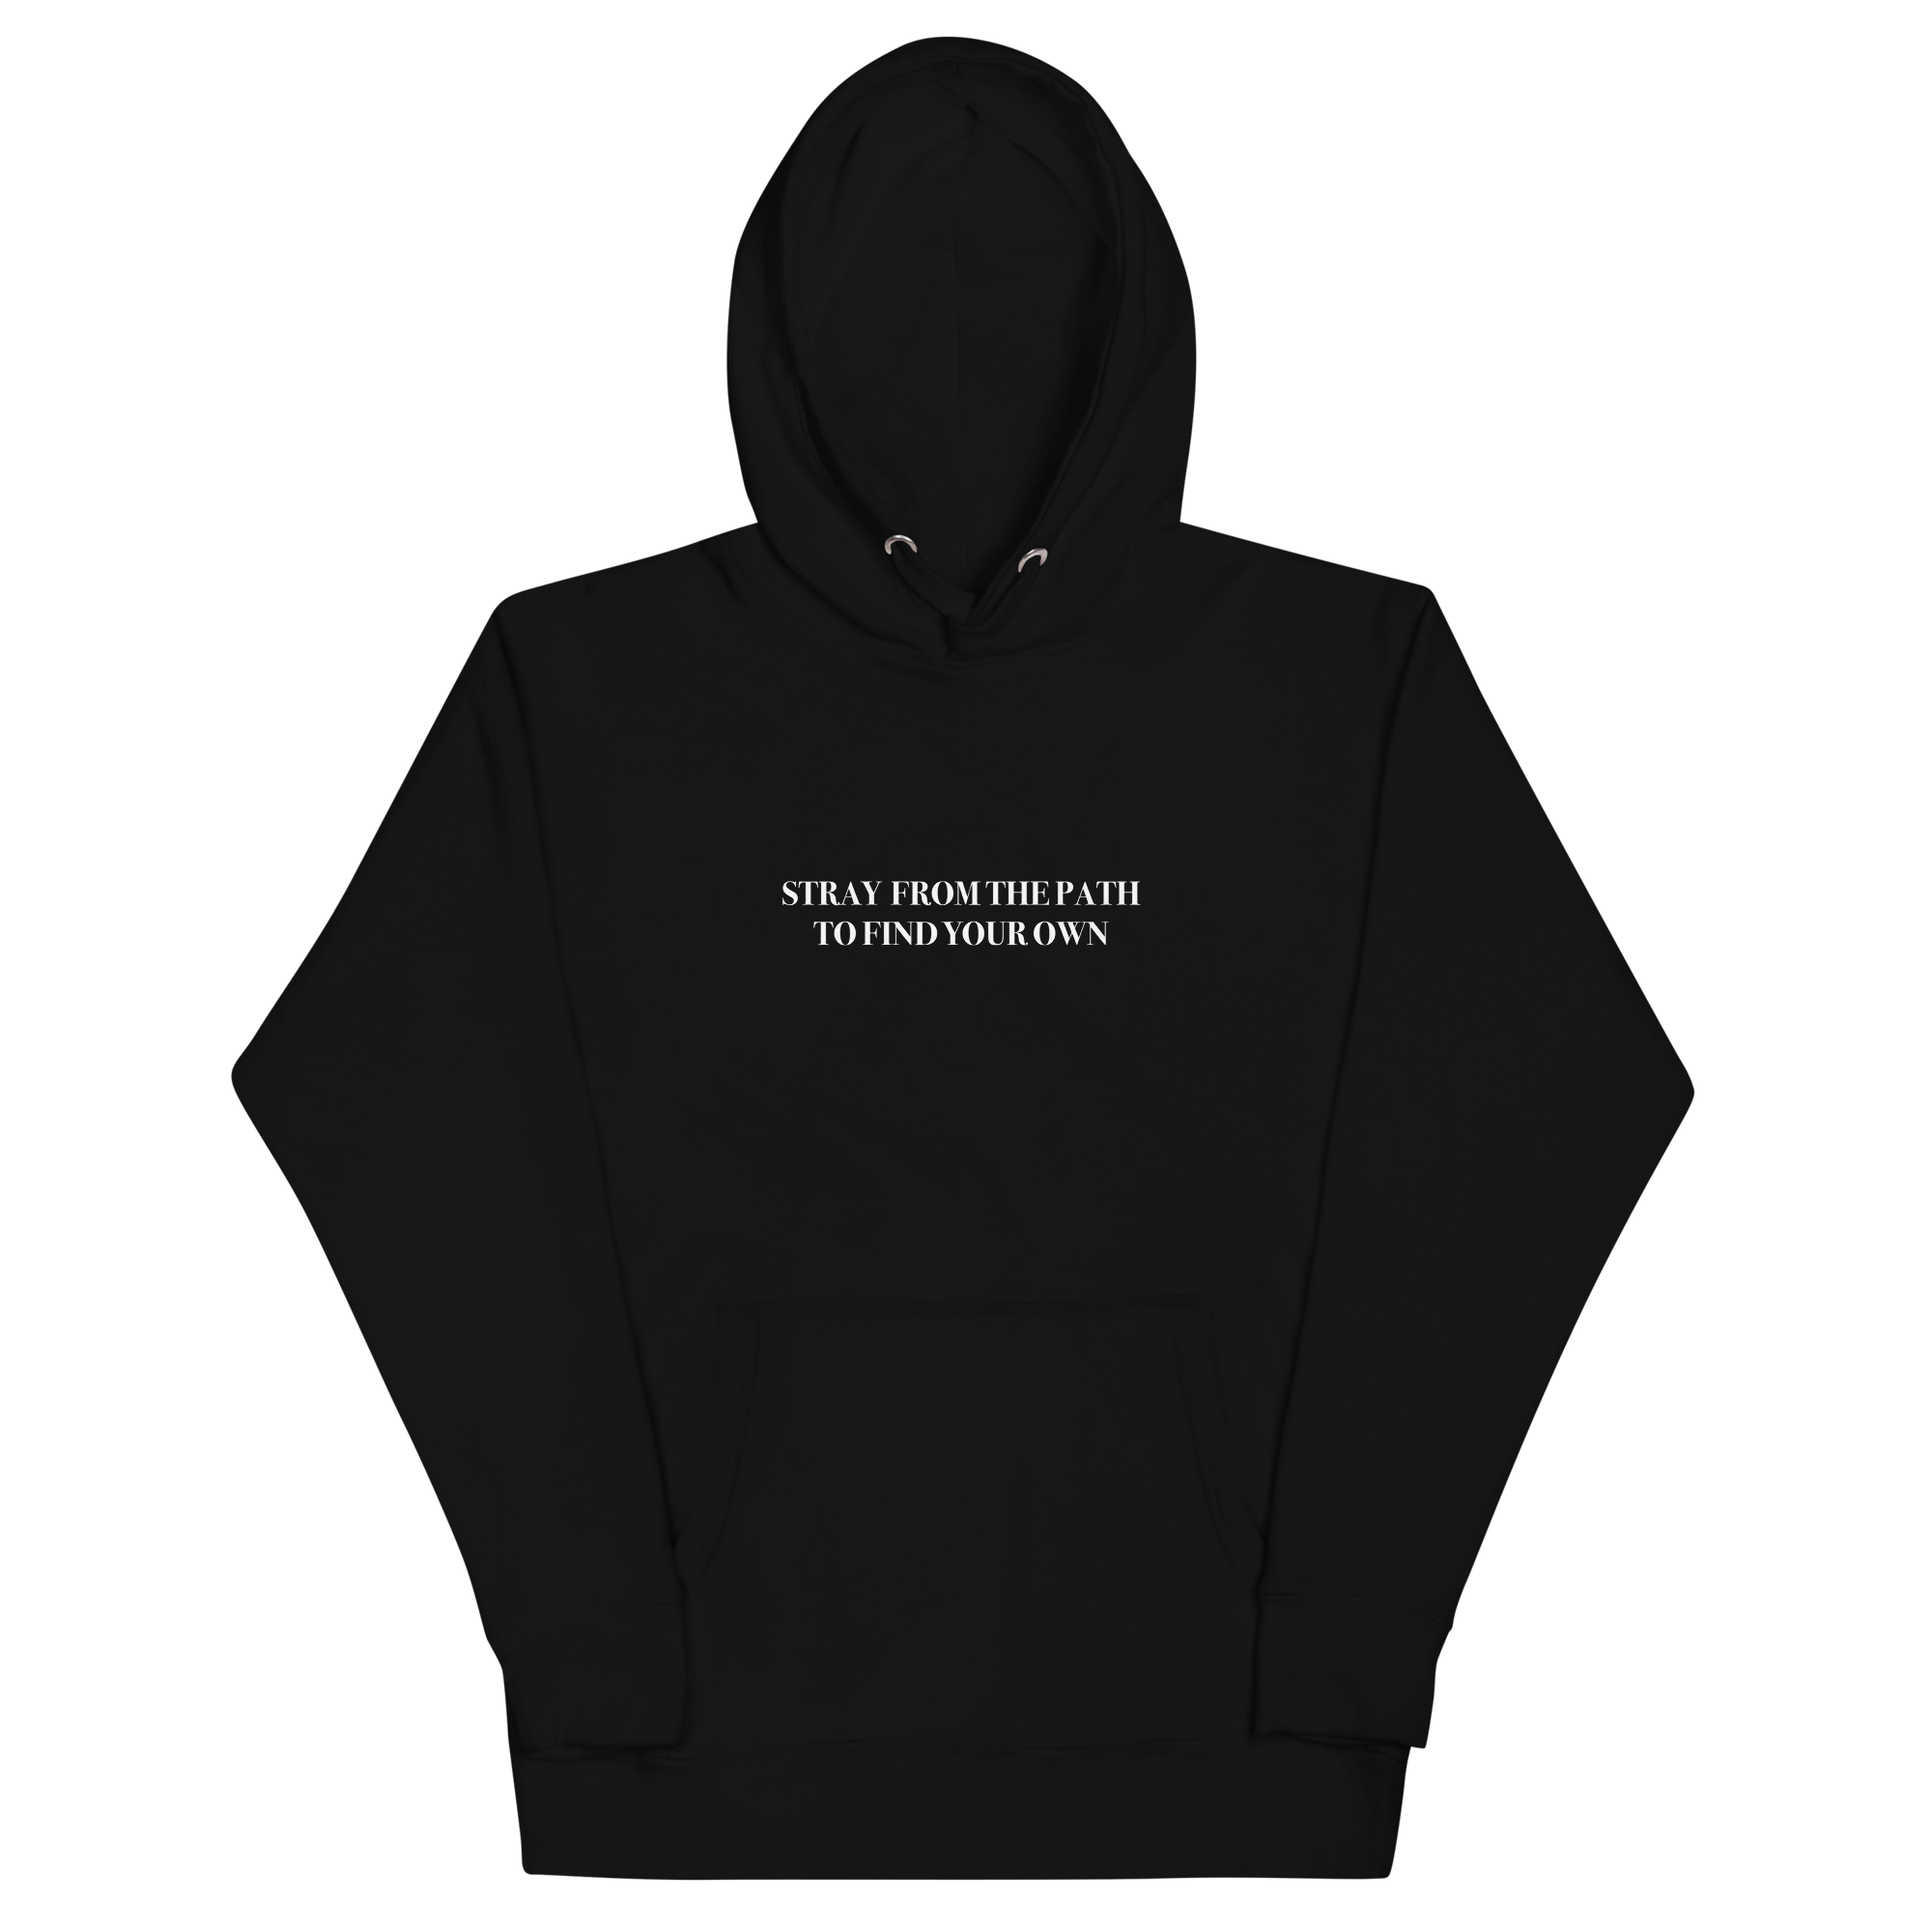 Emma Norton: Big Bad black hoodie with a quote on the front